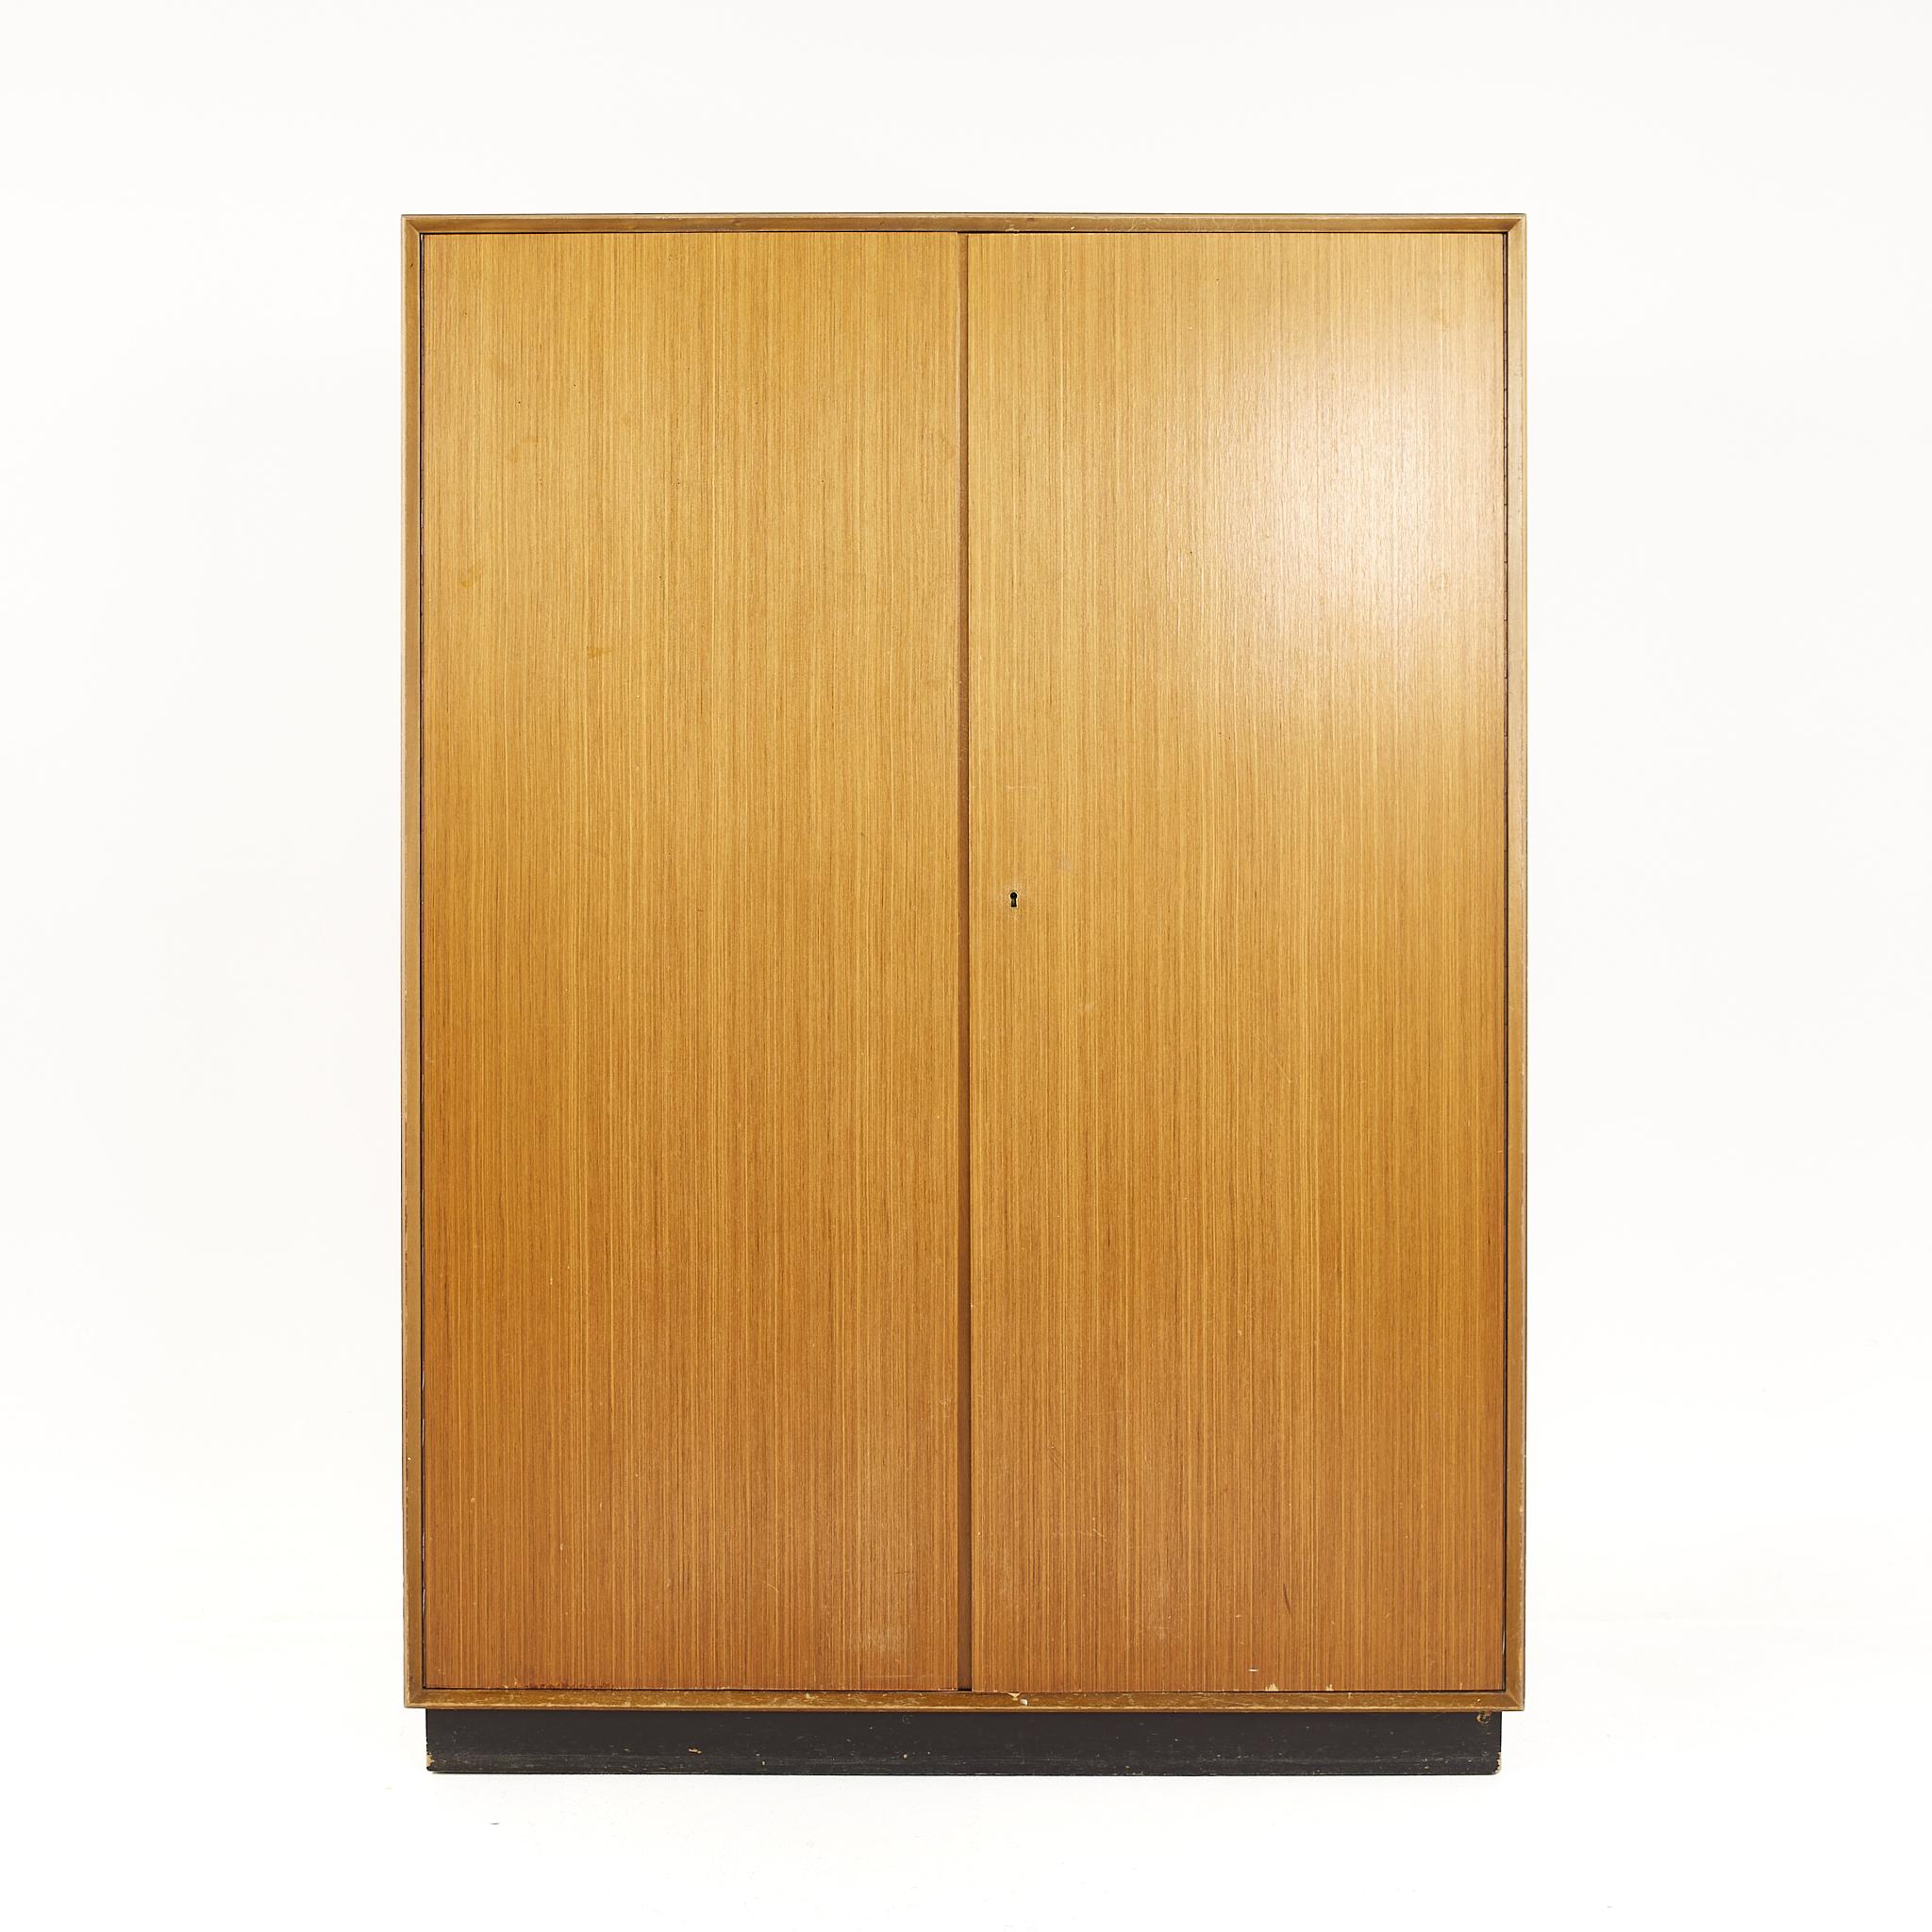 Mid century teak wardrobe armoire

The armoire measures: 45 wide x 21.5 deep x 62.75 inches high

All pieces of furniture can be had in what we call restored vintage condition. That means the piece is restored upon purchase so it’s free of